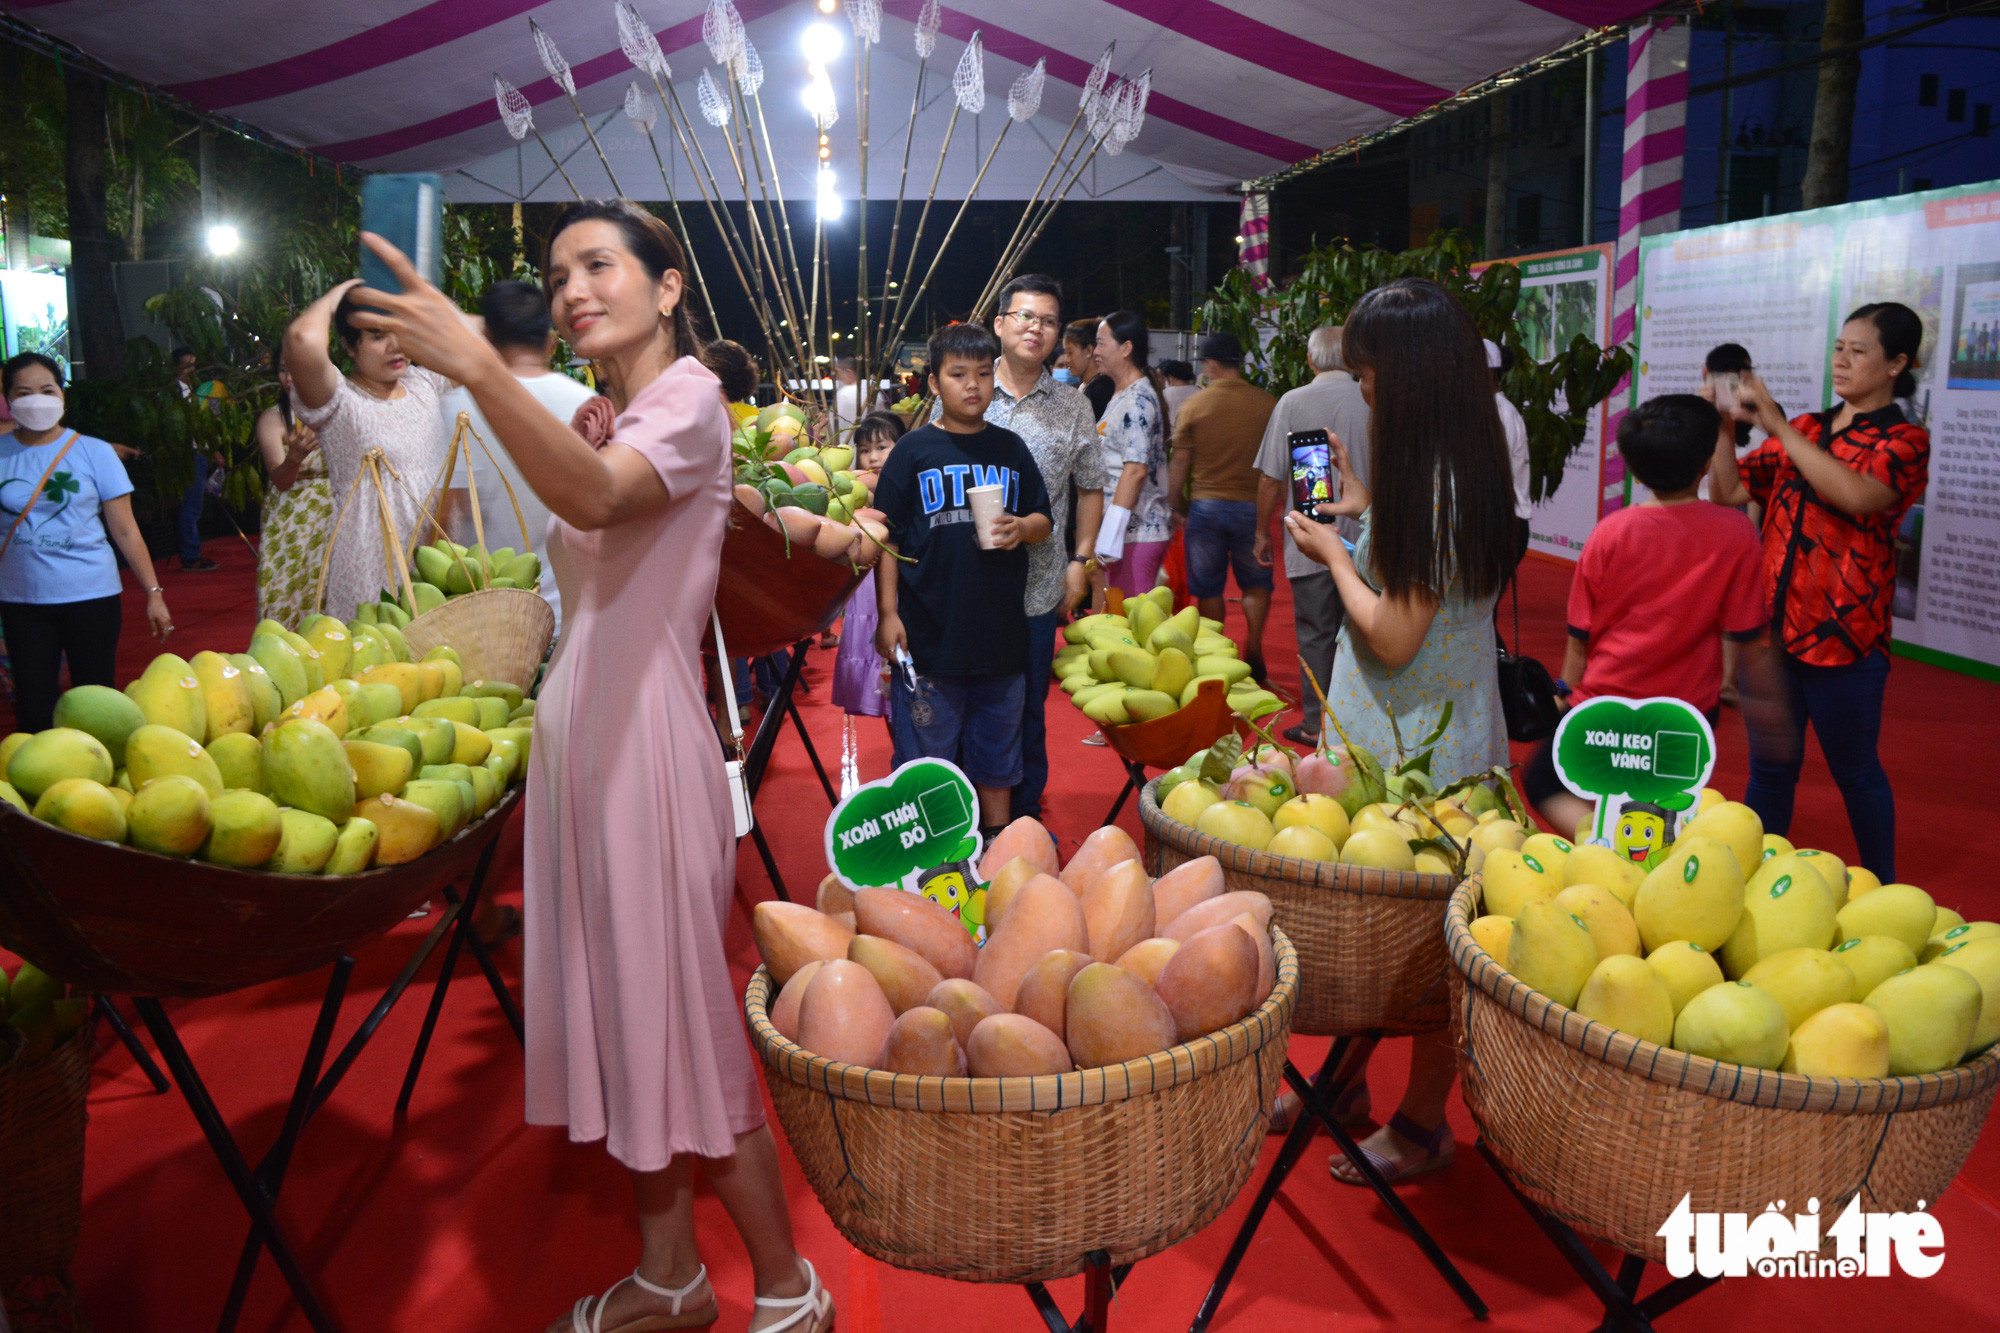 Mekong Delta people flock to mango fest in Vietnam’s Dong Thap